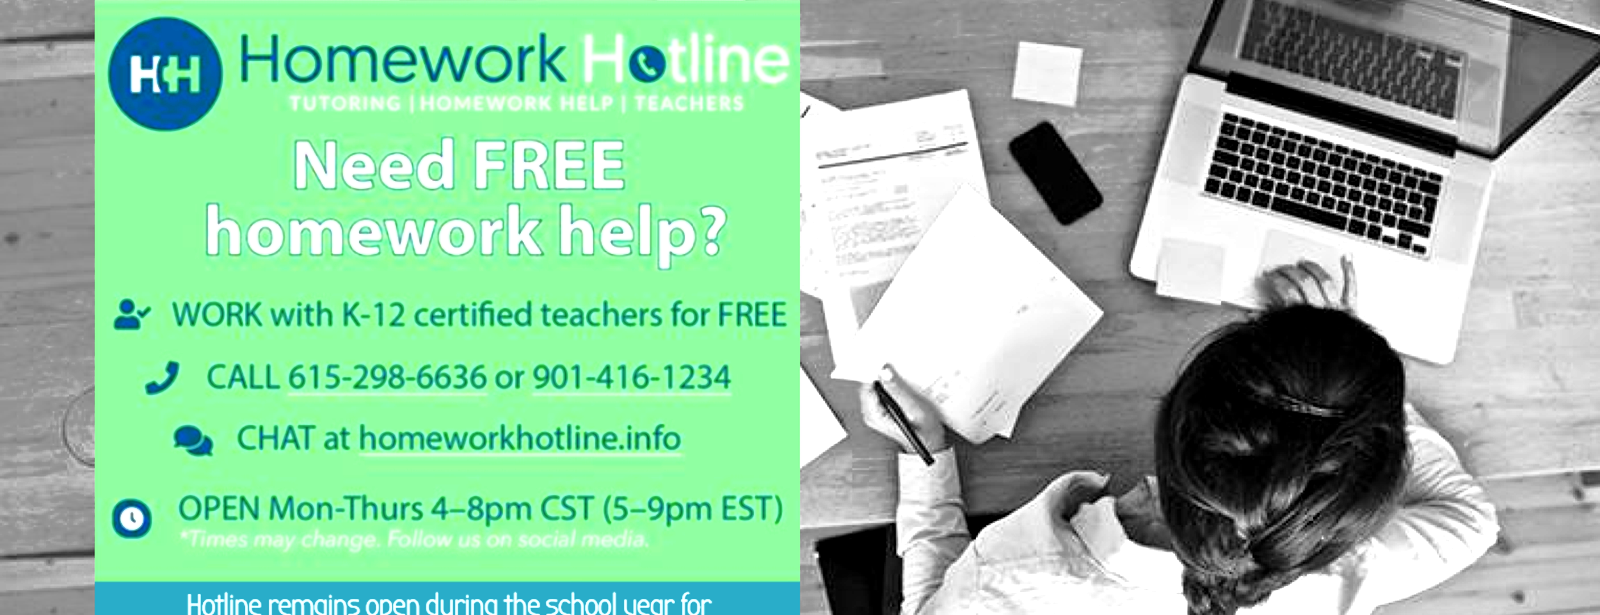 Homework Hotline helps students achieve and thrive - one assignment at a time. 